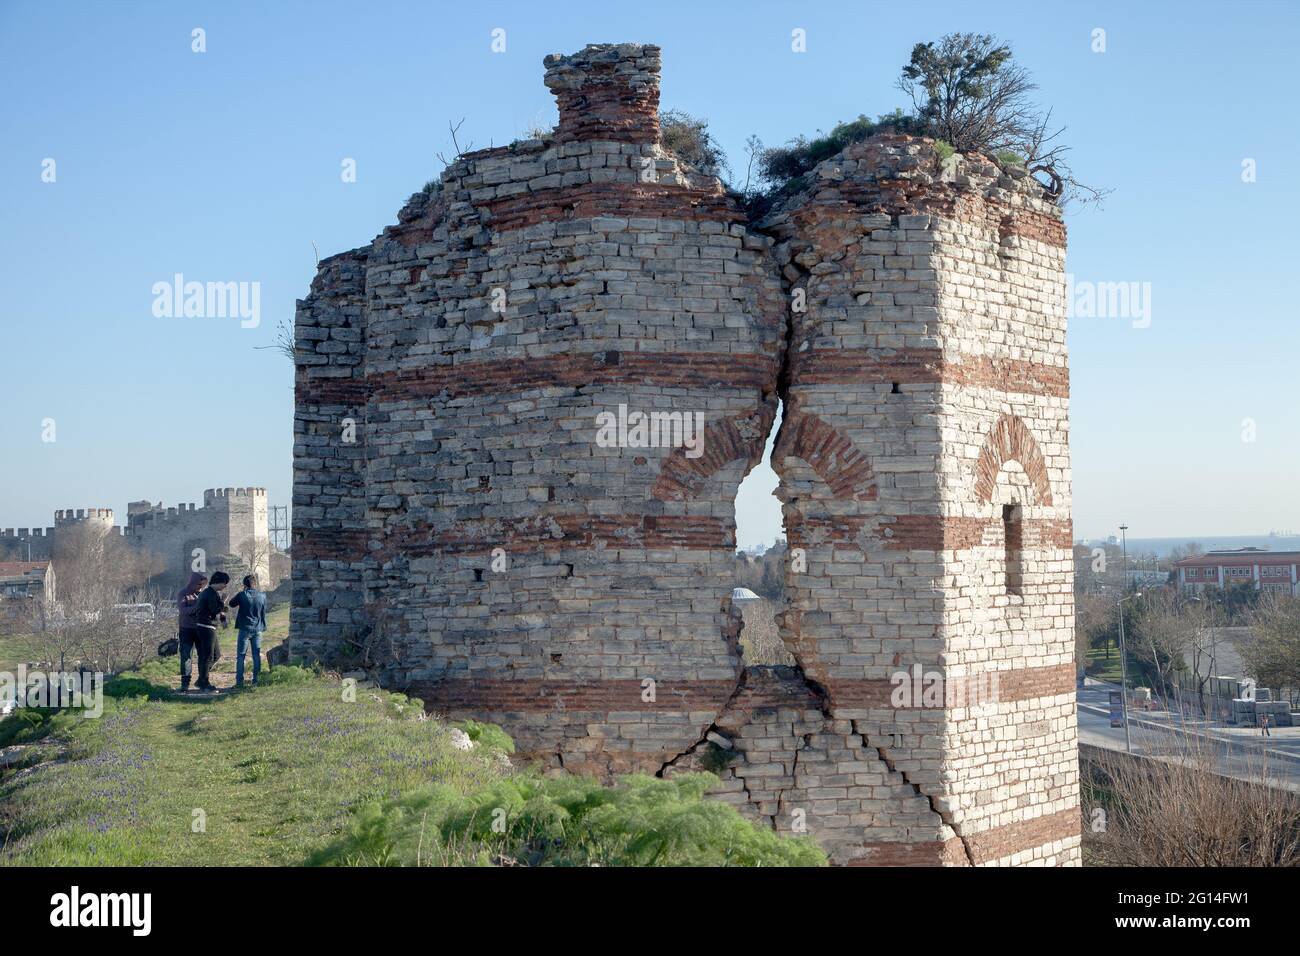 Fatih,Istanbul/Turkey - 02-04-2017:The ruined view of the historic Byzantine city walls Stock Photo